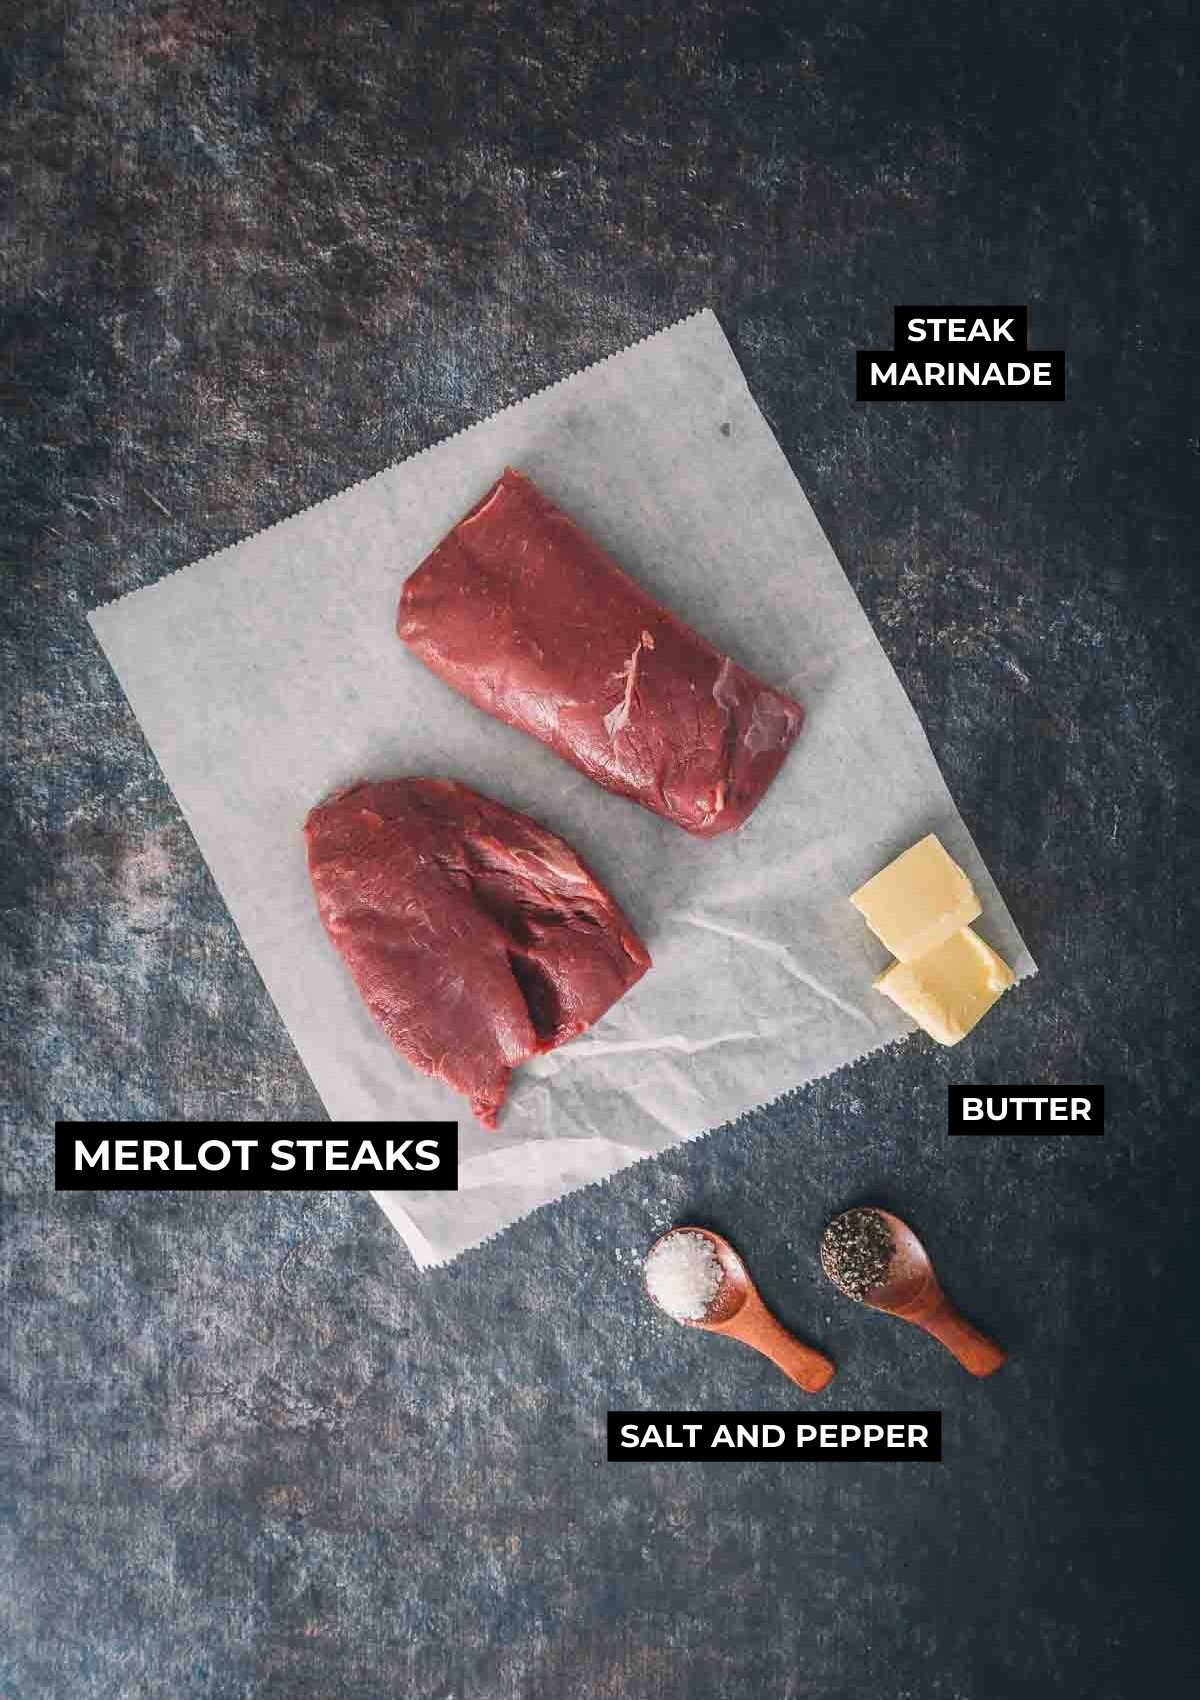 Ingredients for this seared steak recipe.